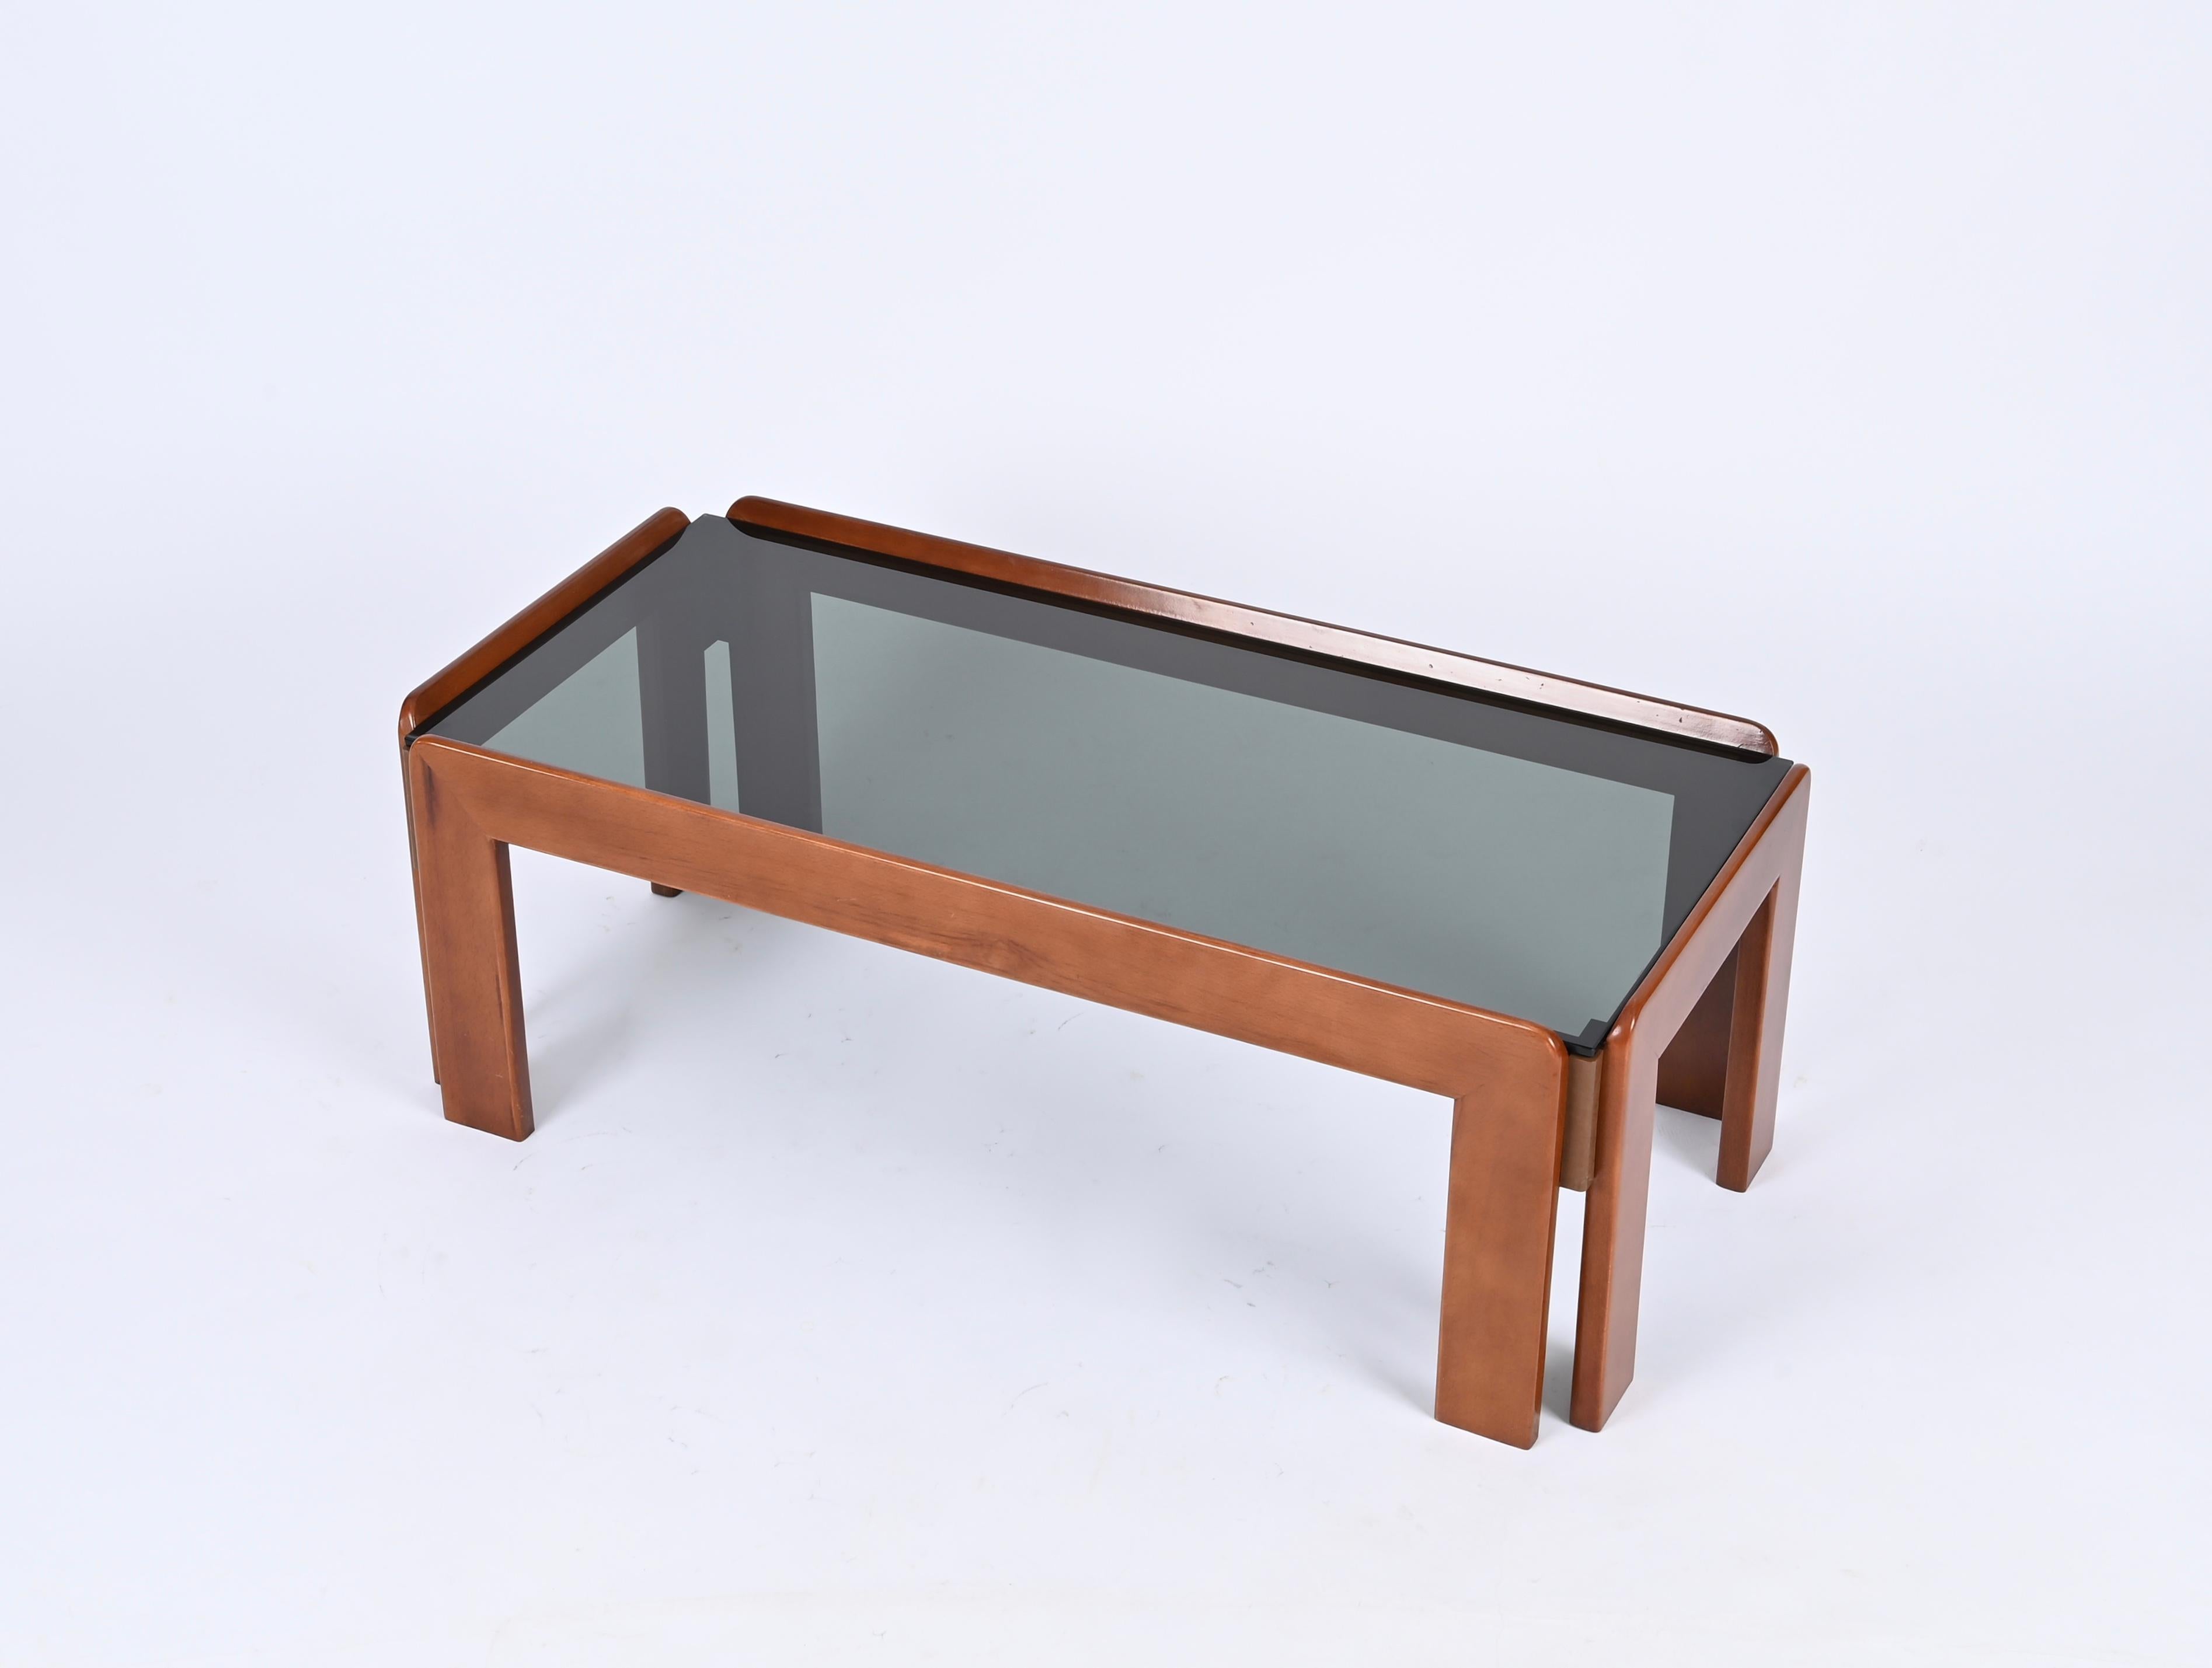 Tobia Scarpa Rectangular Walnut Coffee Table with Smoked Glass, Italy 1960s For Sale 6